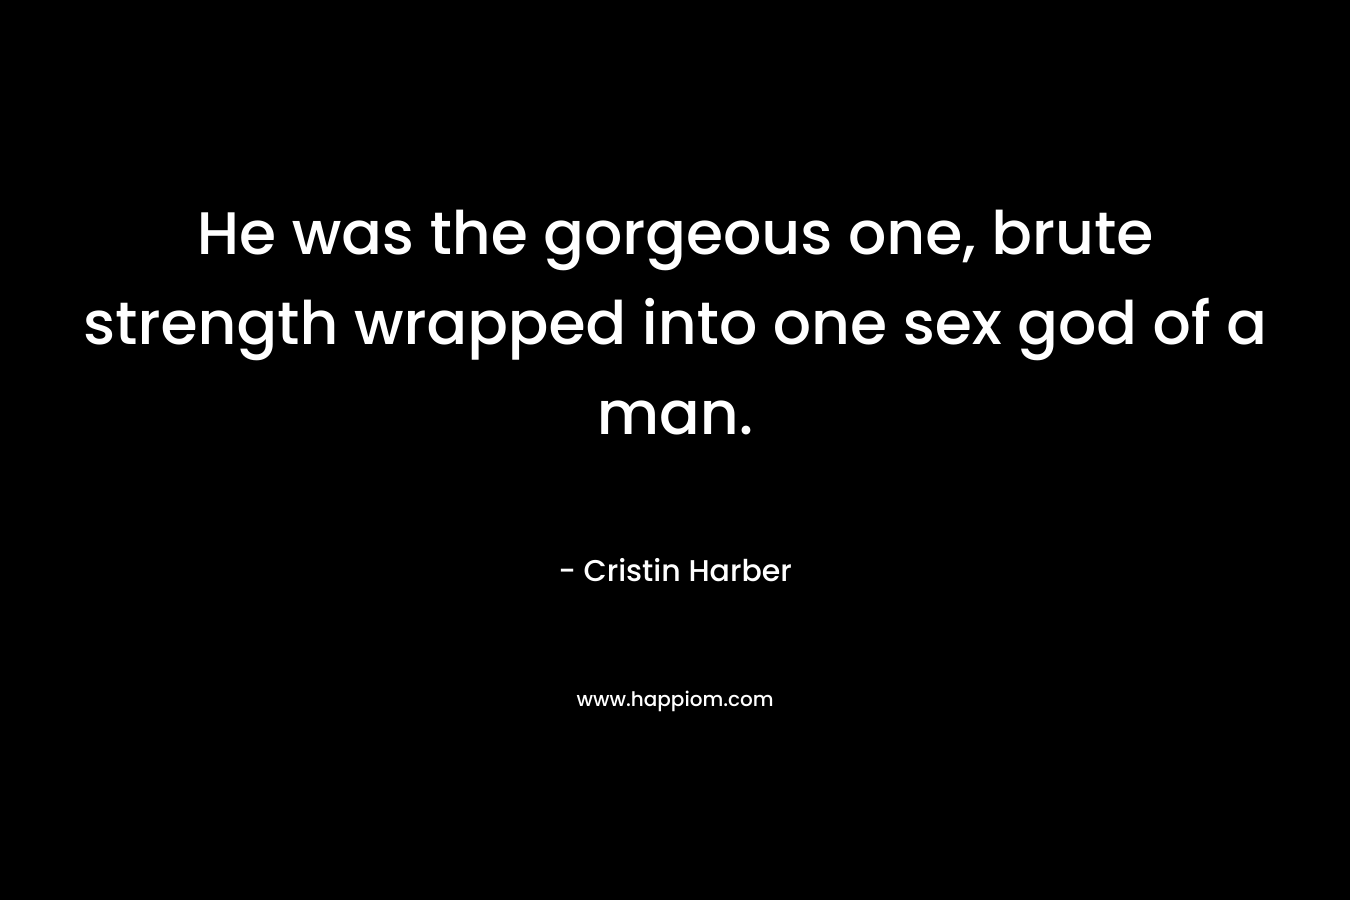 He was the gorgeous one, brute strength wrapped into one sex god of a man. – Cristin Harber